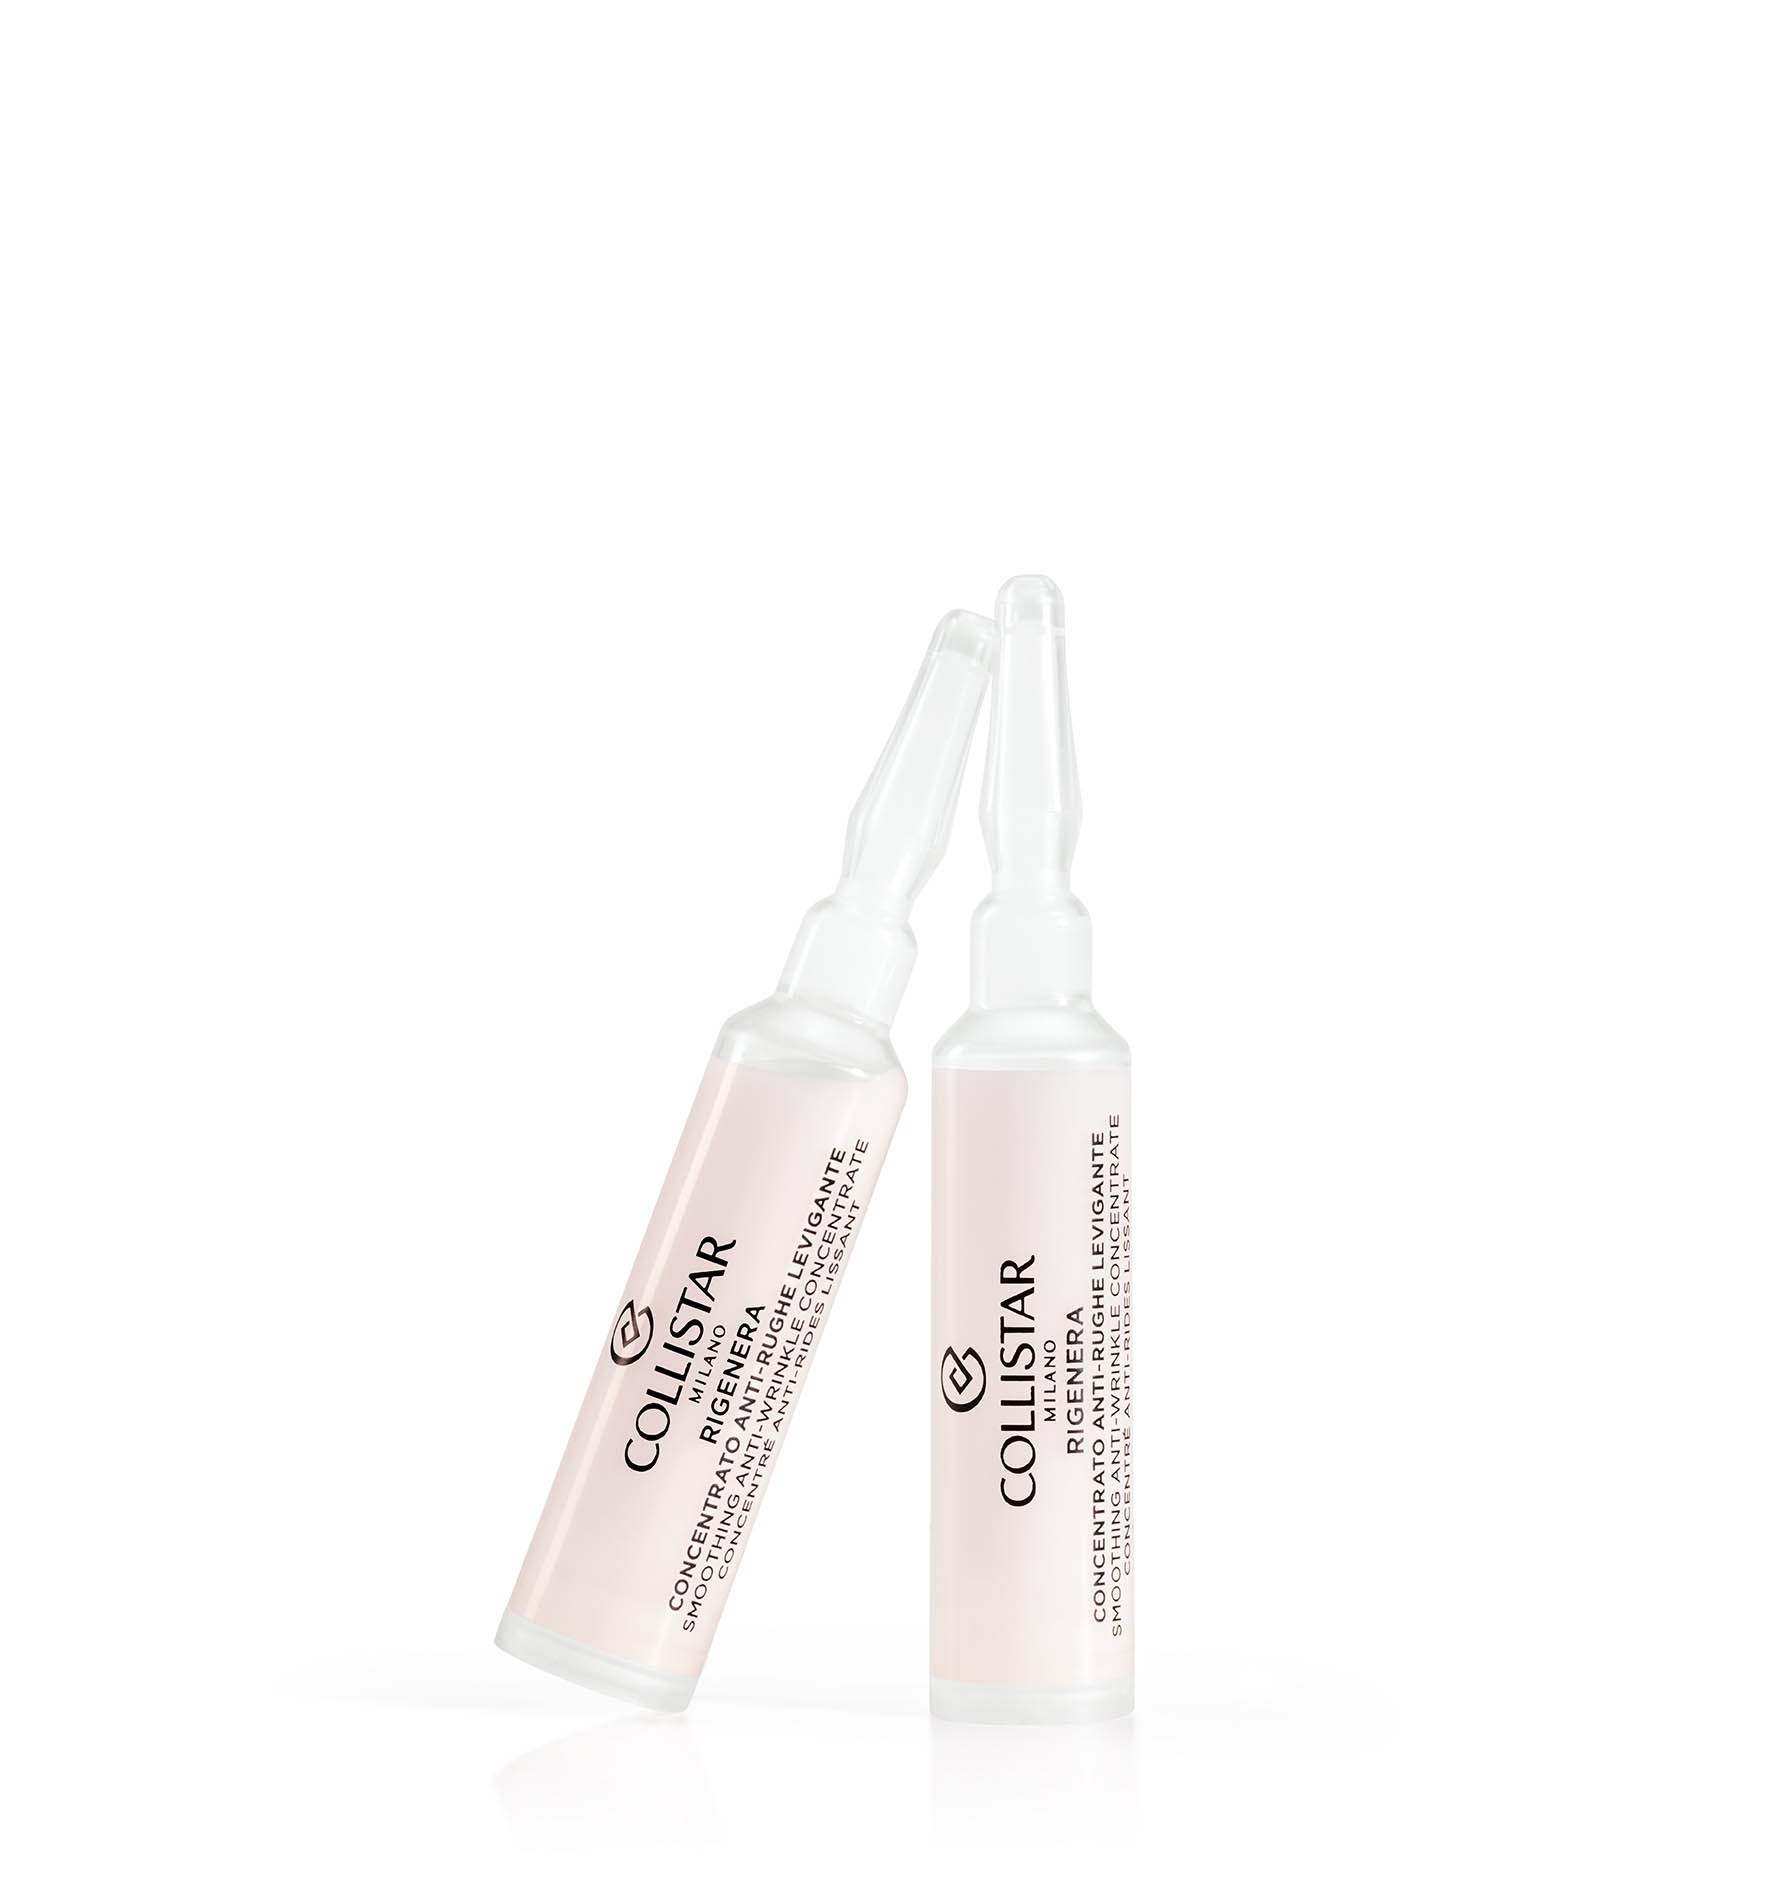 RIGENERA SMOOTHING ANTI-WRINKLE
CONCENTRATE - Specialties | Collistar - Shop Online Ufficiale